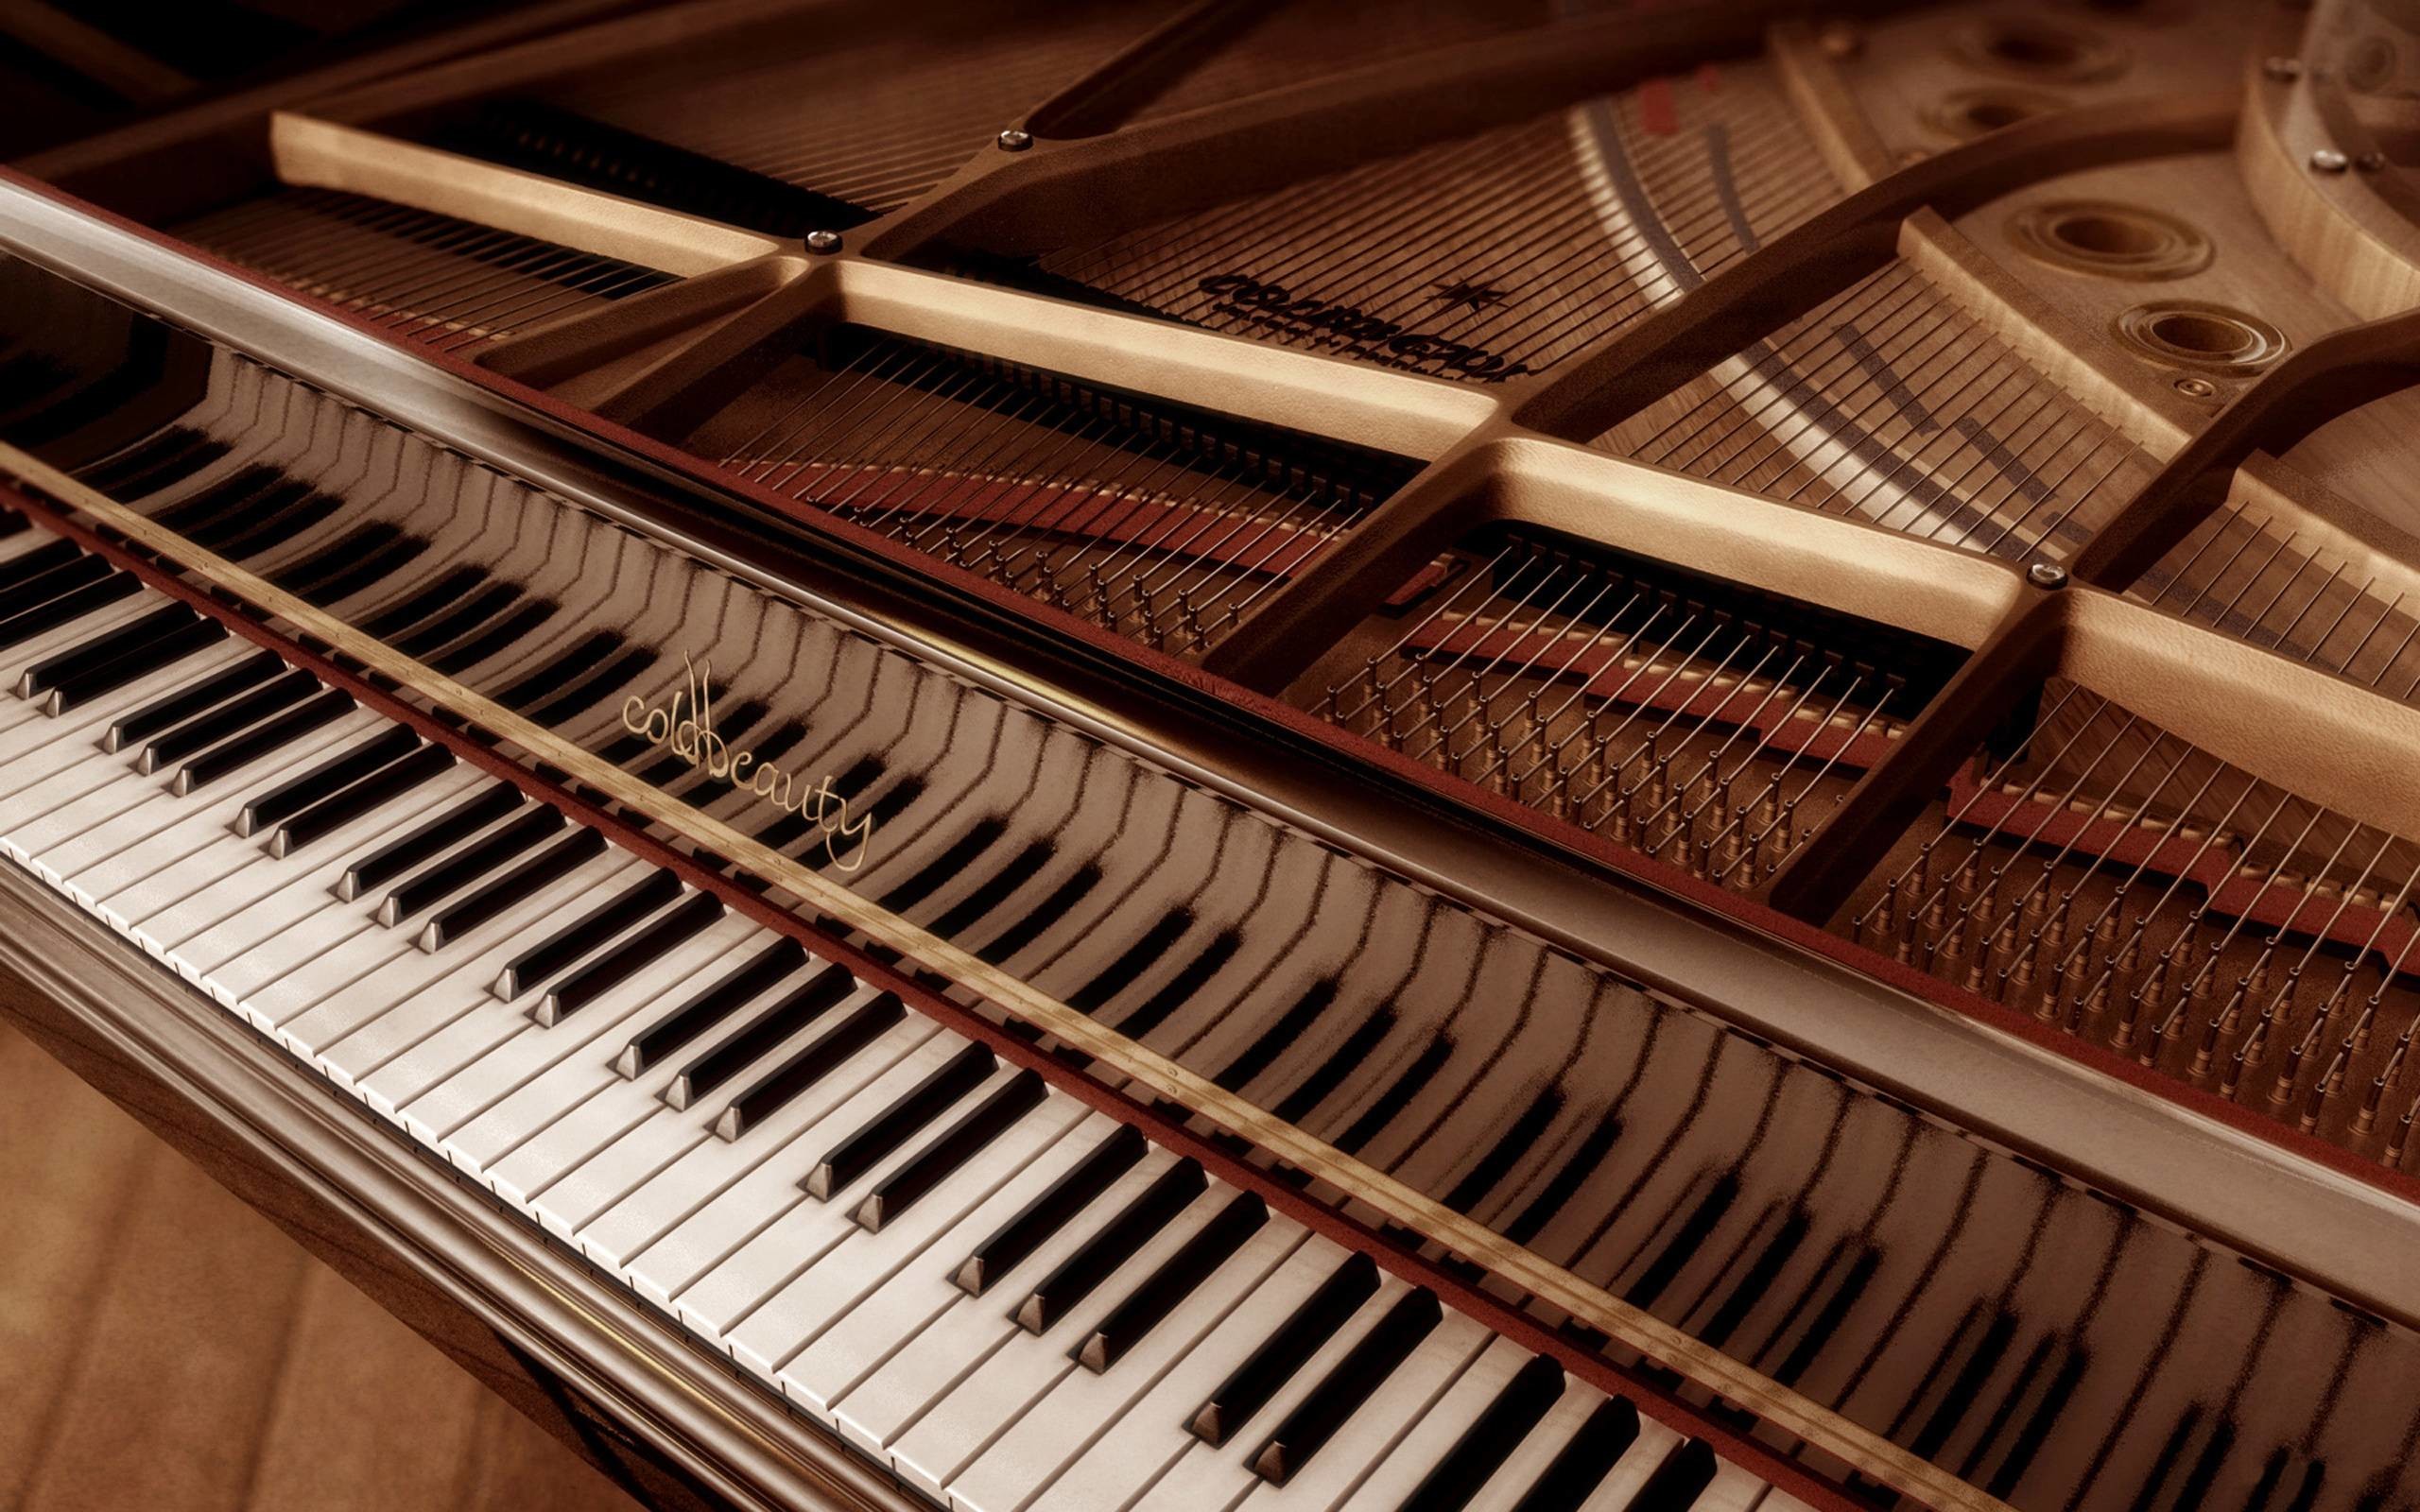 2560x1600 Wallpapers For > Piano Wallpaper Hd Vintage